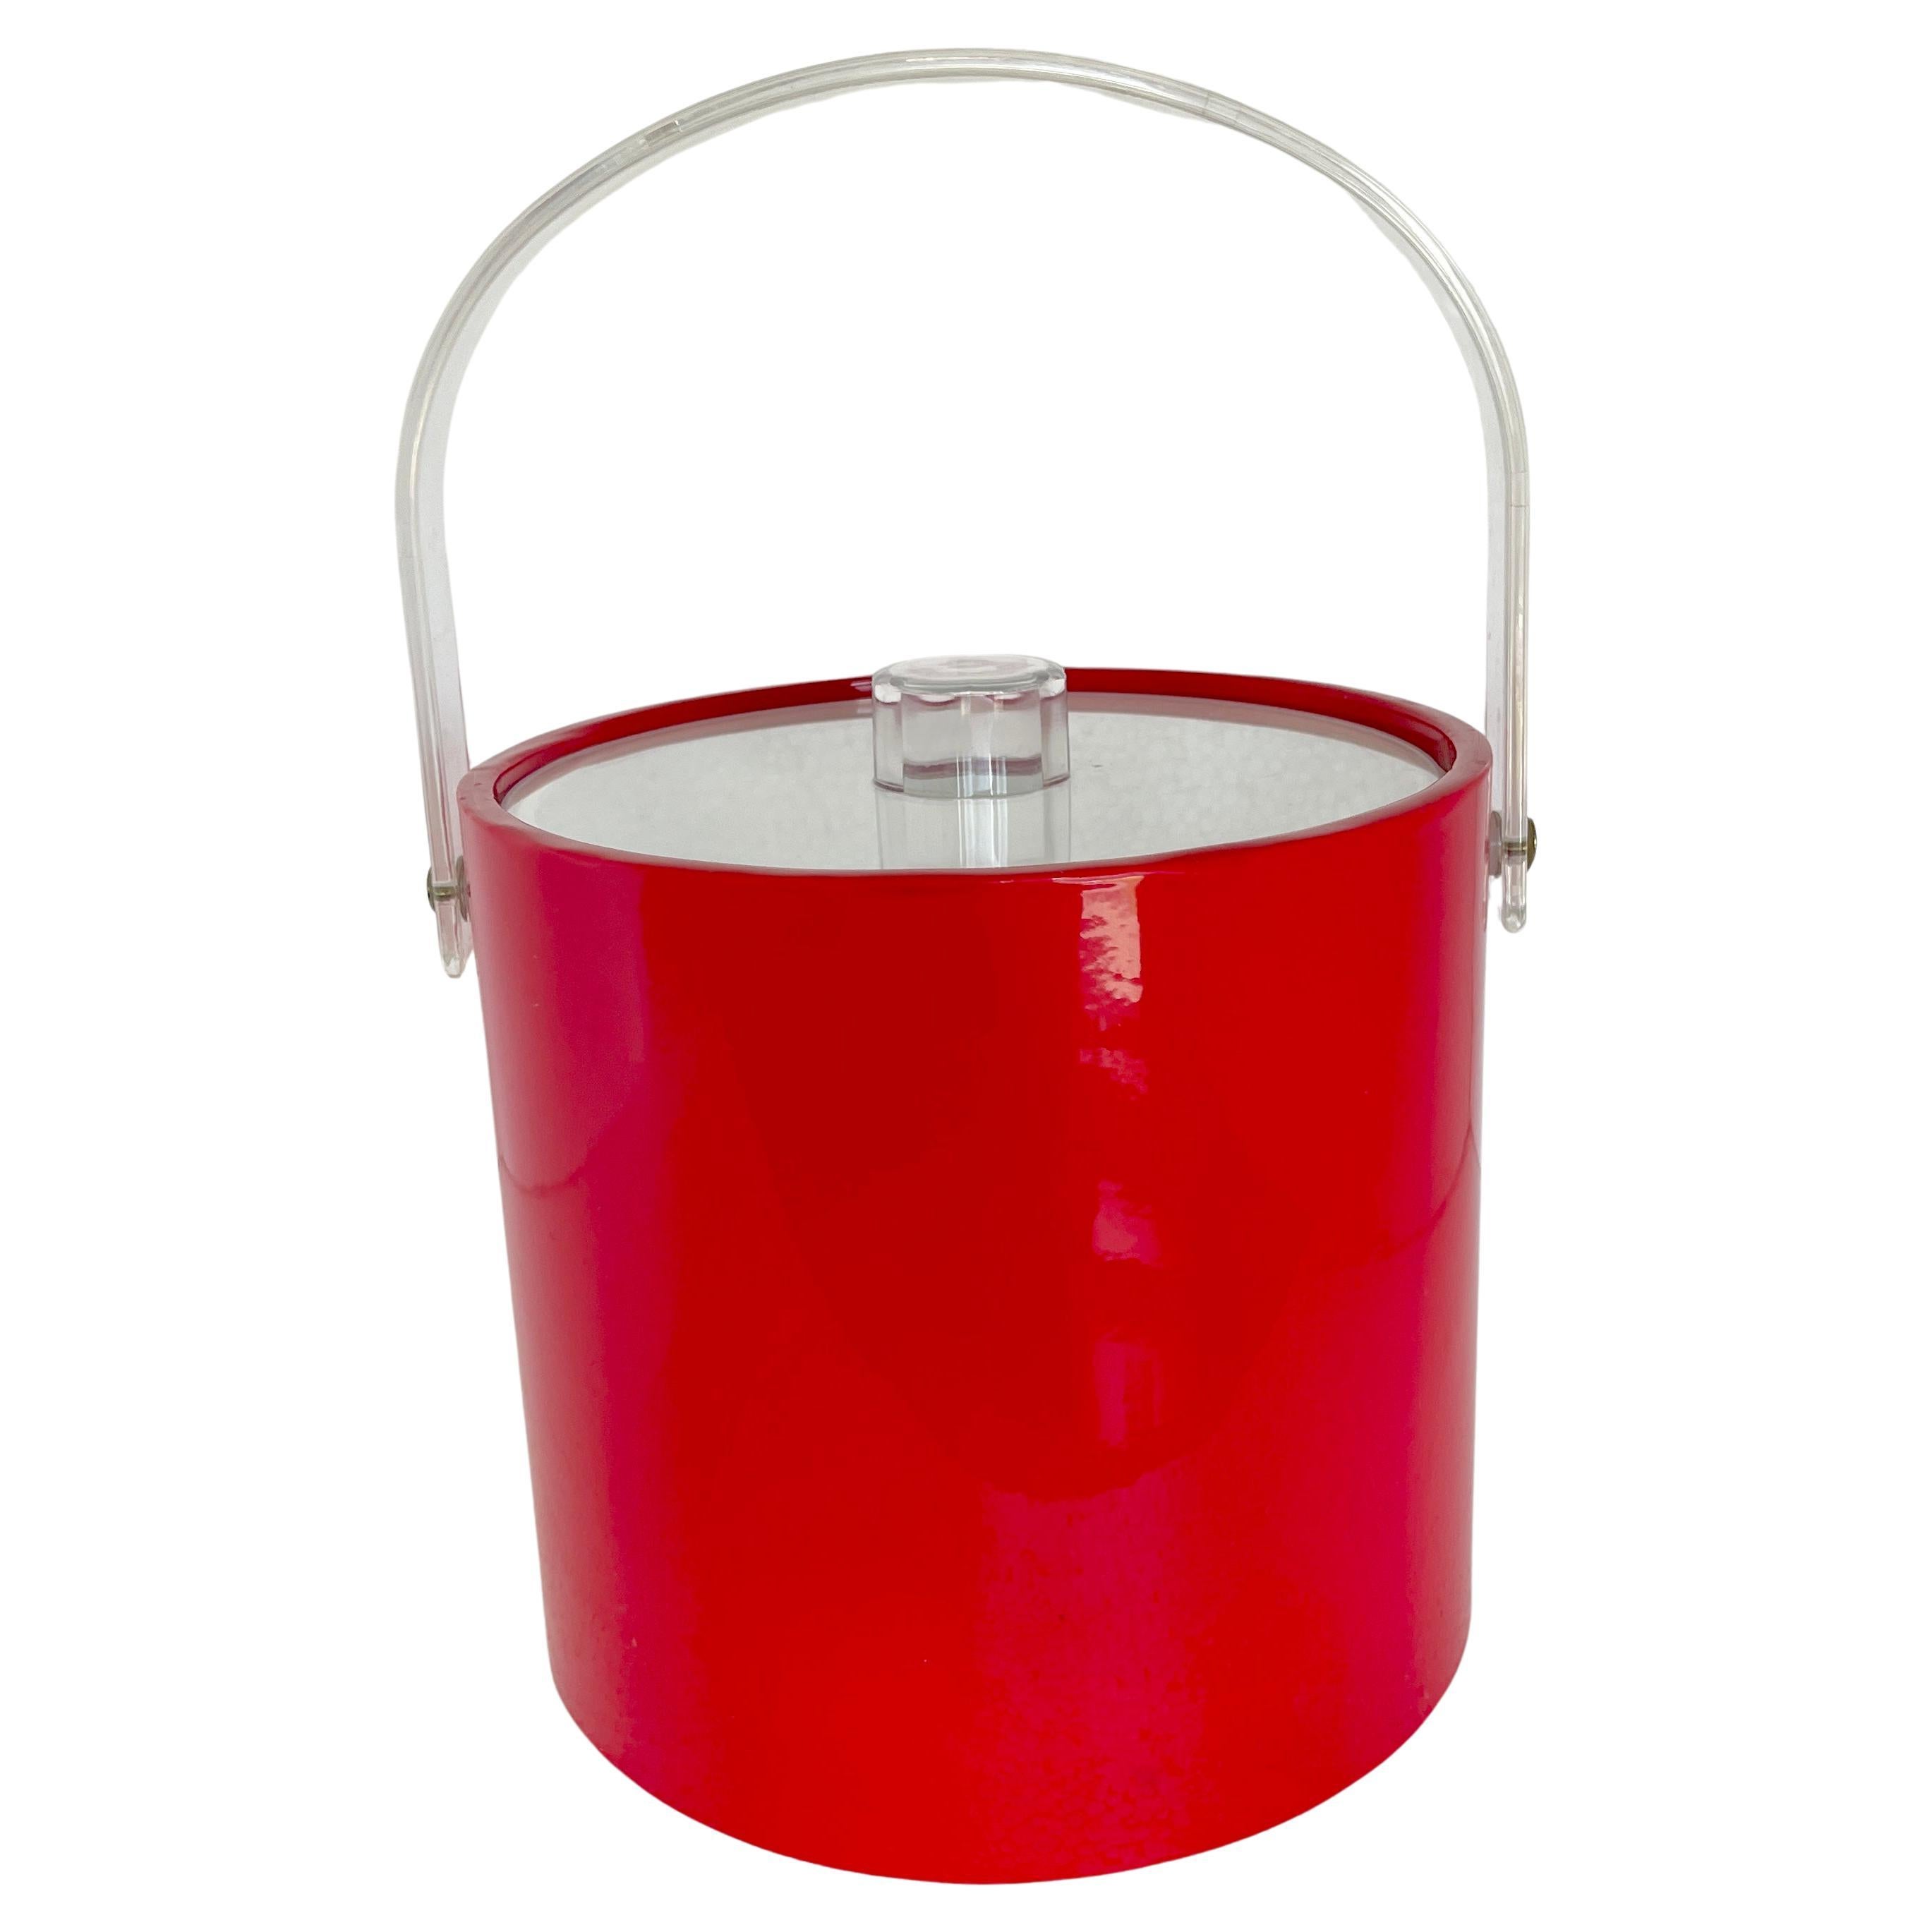 Mid-Century Modern ice bucket. Shiny red faux leather exterior with white interior; solid and fully functional ice bucket. The acrylic handle and lid are classic mid-century modern design elements. The ice bucket is bright and happy and is a welcome